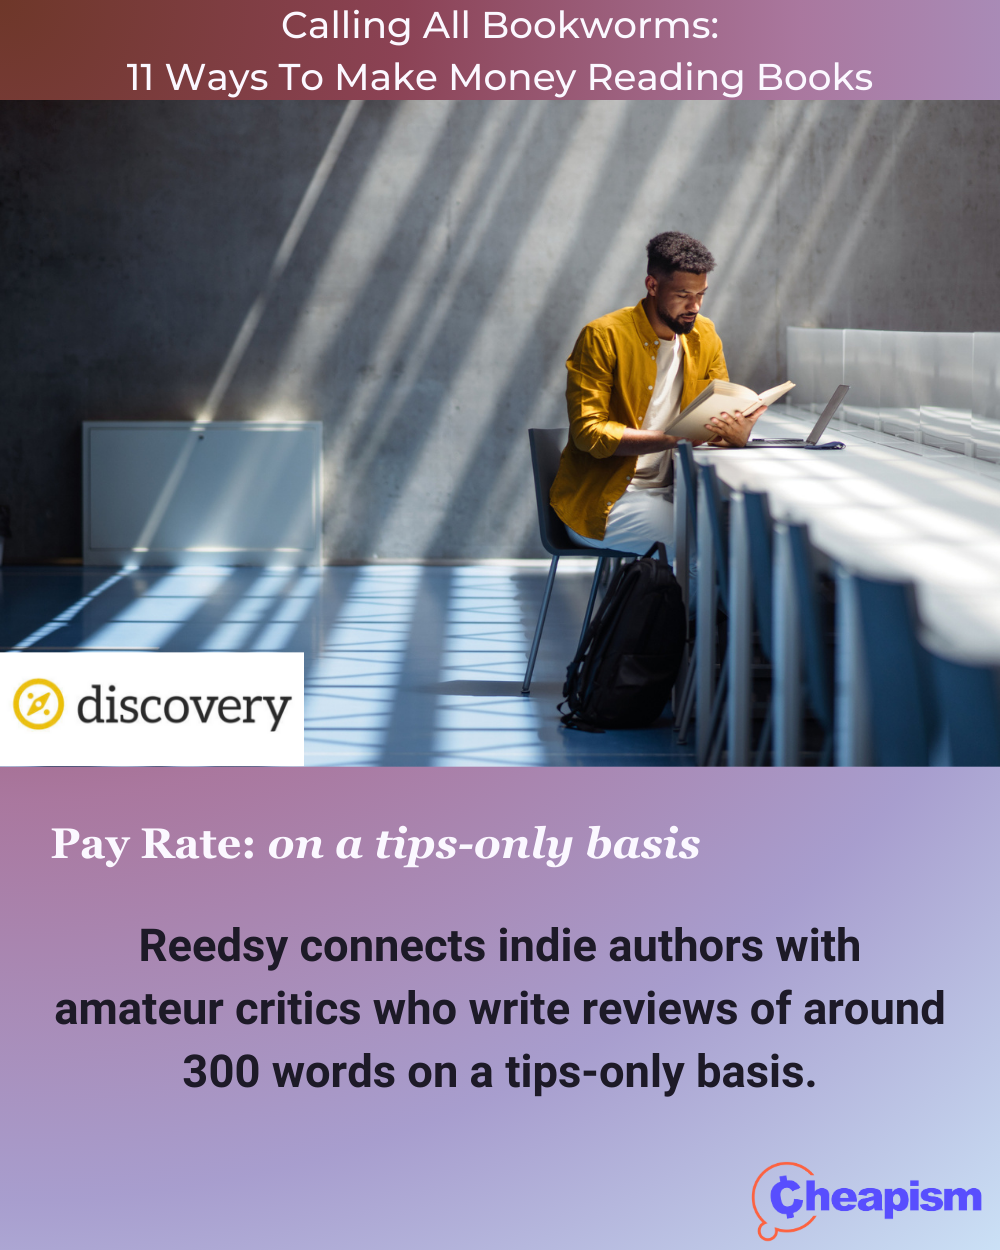 As a Reedsy reviewer, you’ll gain access to a pool of forthcoming indie books. You won’t be compensated for your work, but you will receive free books and tips from the website’s readers (so generous). Surprisingly, Reedsy is somewhat selective when it comes to reviewers — some nerve given the lack of pay — <a href="https://reedsy.com/discovery/reviewers">requiring several examples of previous book criticism</a>.